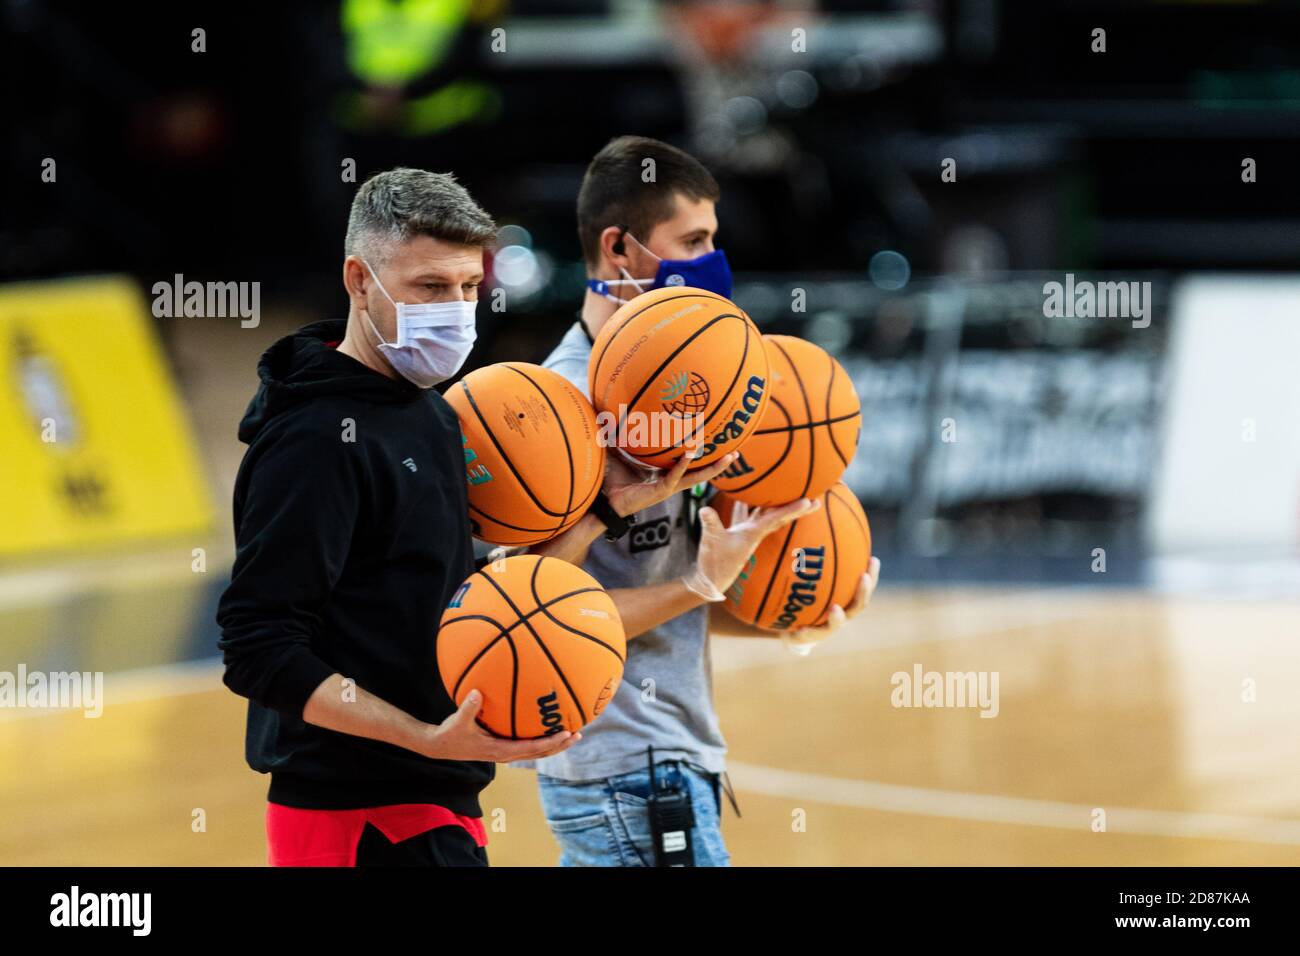 Bilbao, Basque Country, SPAIN. 27th Oct, 2020. October 27, 2020, Bilbao,  Basque Country, SPAIN: Basketball CL staff people with the official ball  during the Basketball Champions League game between Bilbao Basket and